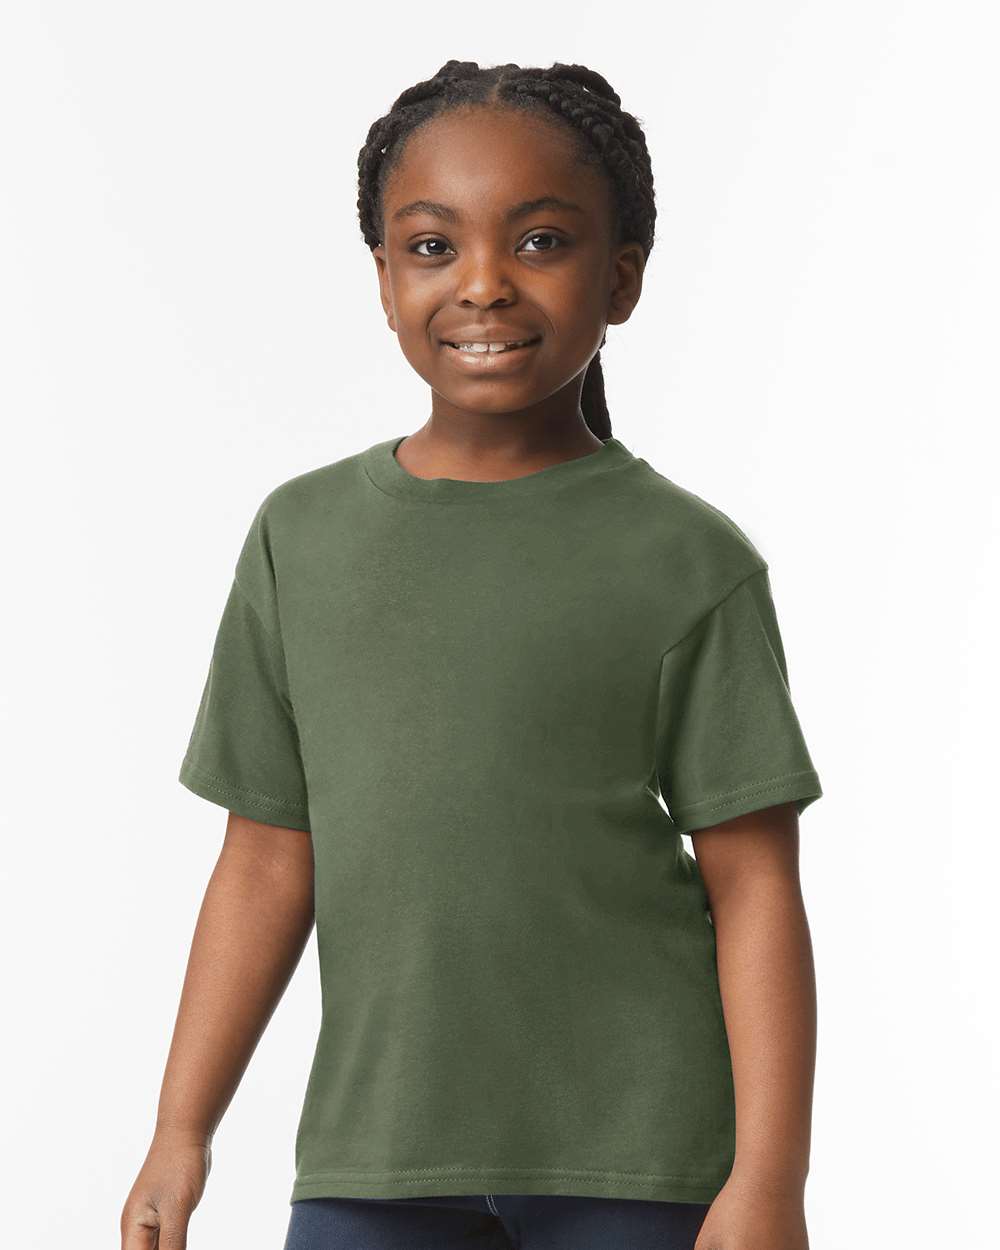 Boy clothes. Young modern child with apparel around, different